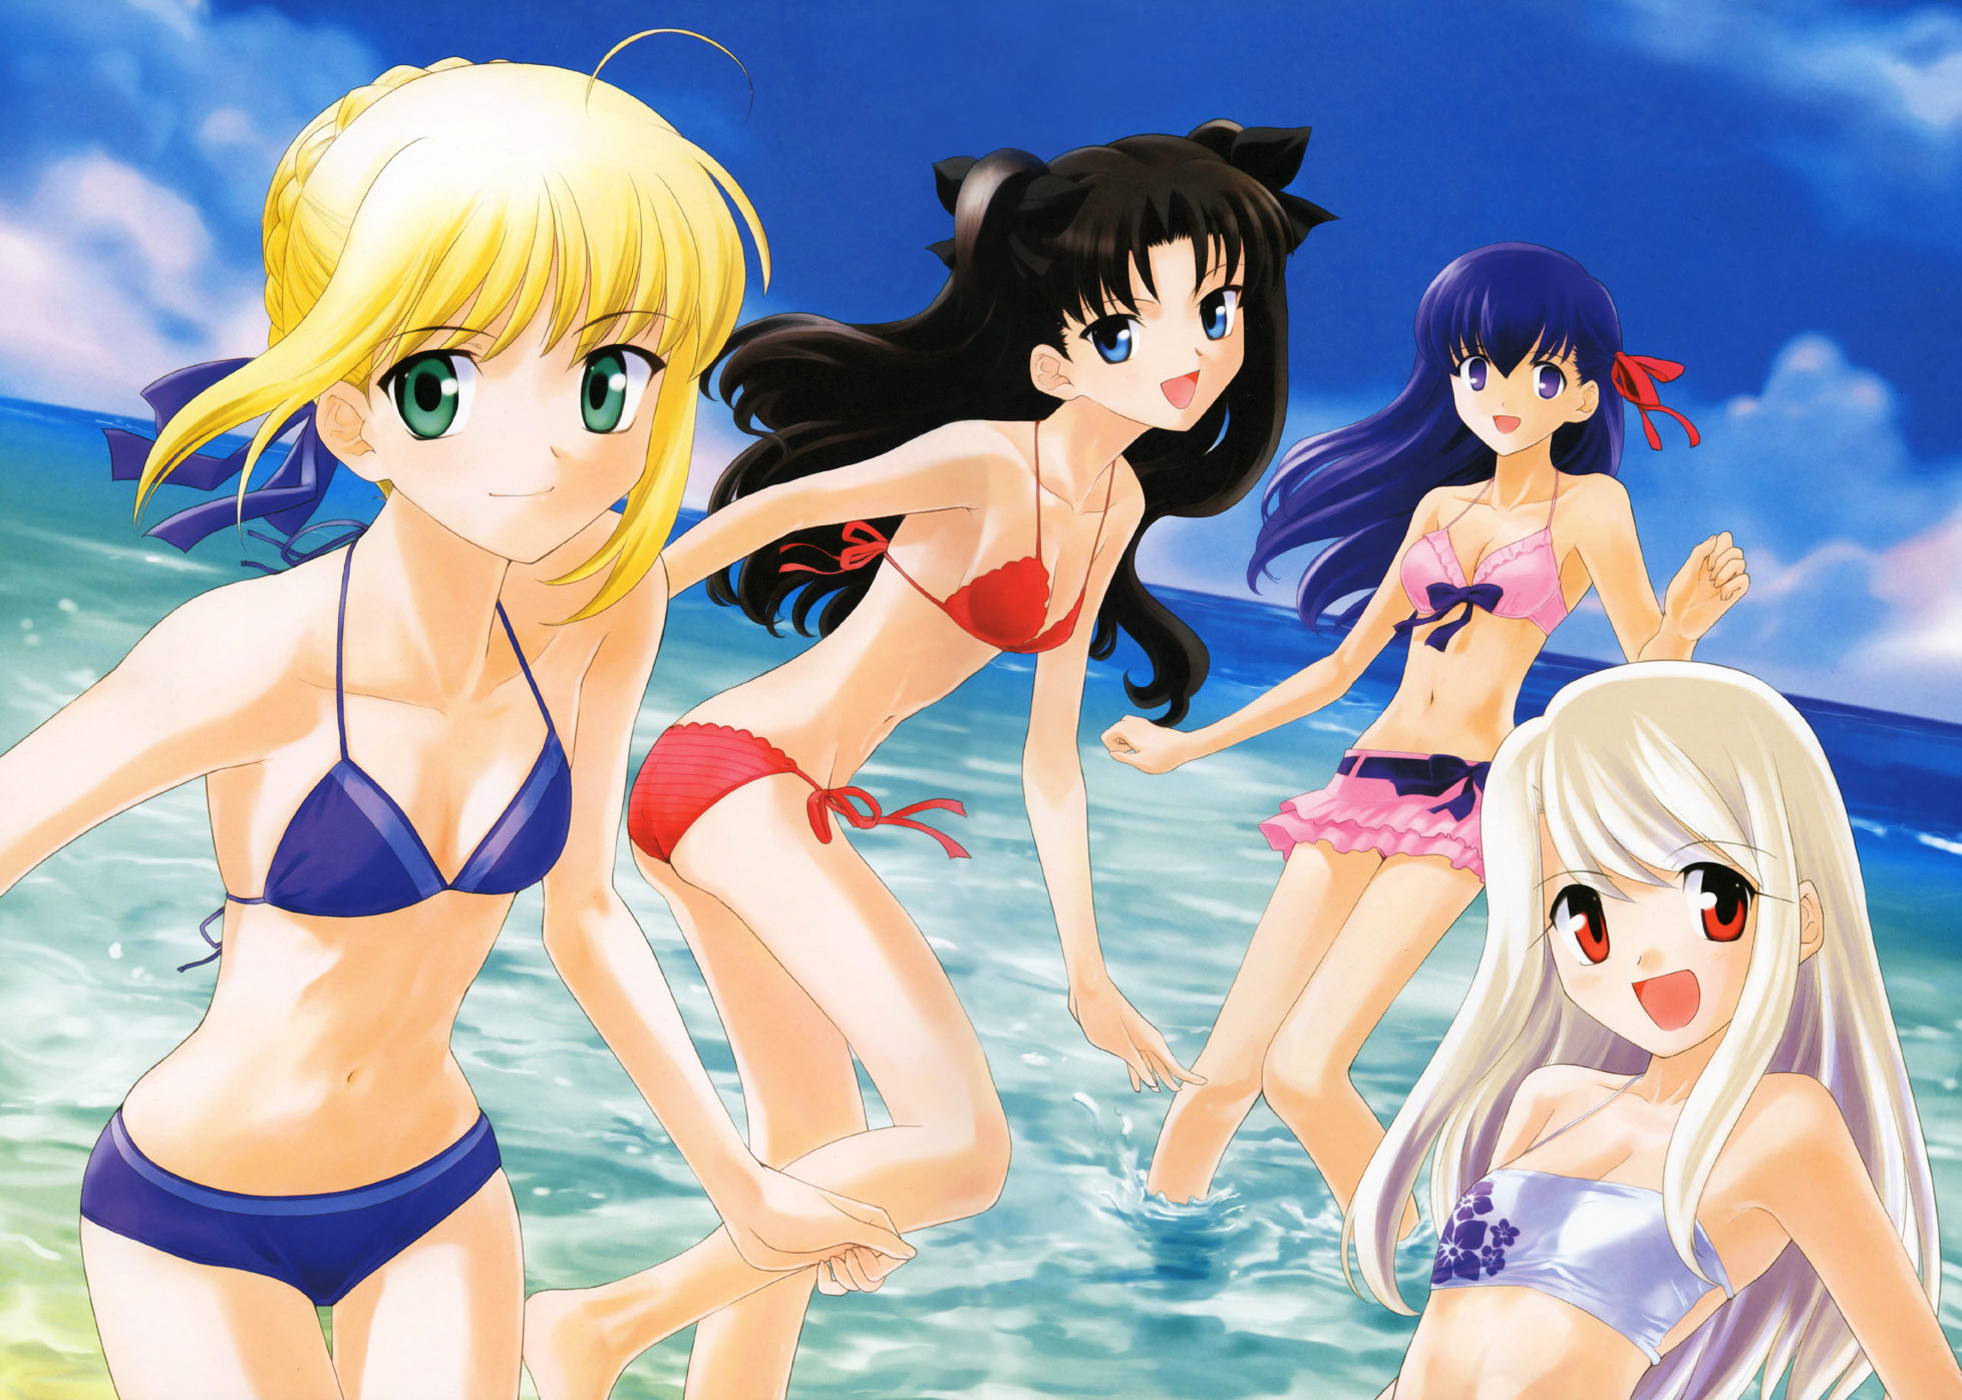 Mage quartet: Saber, Rin, Sakura, and Illyasviel, from the Fate Series, united in a captivating hd desktop wallpaper.